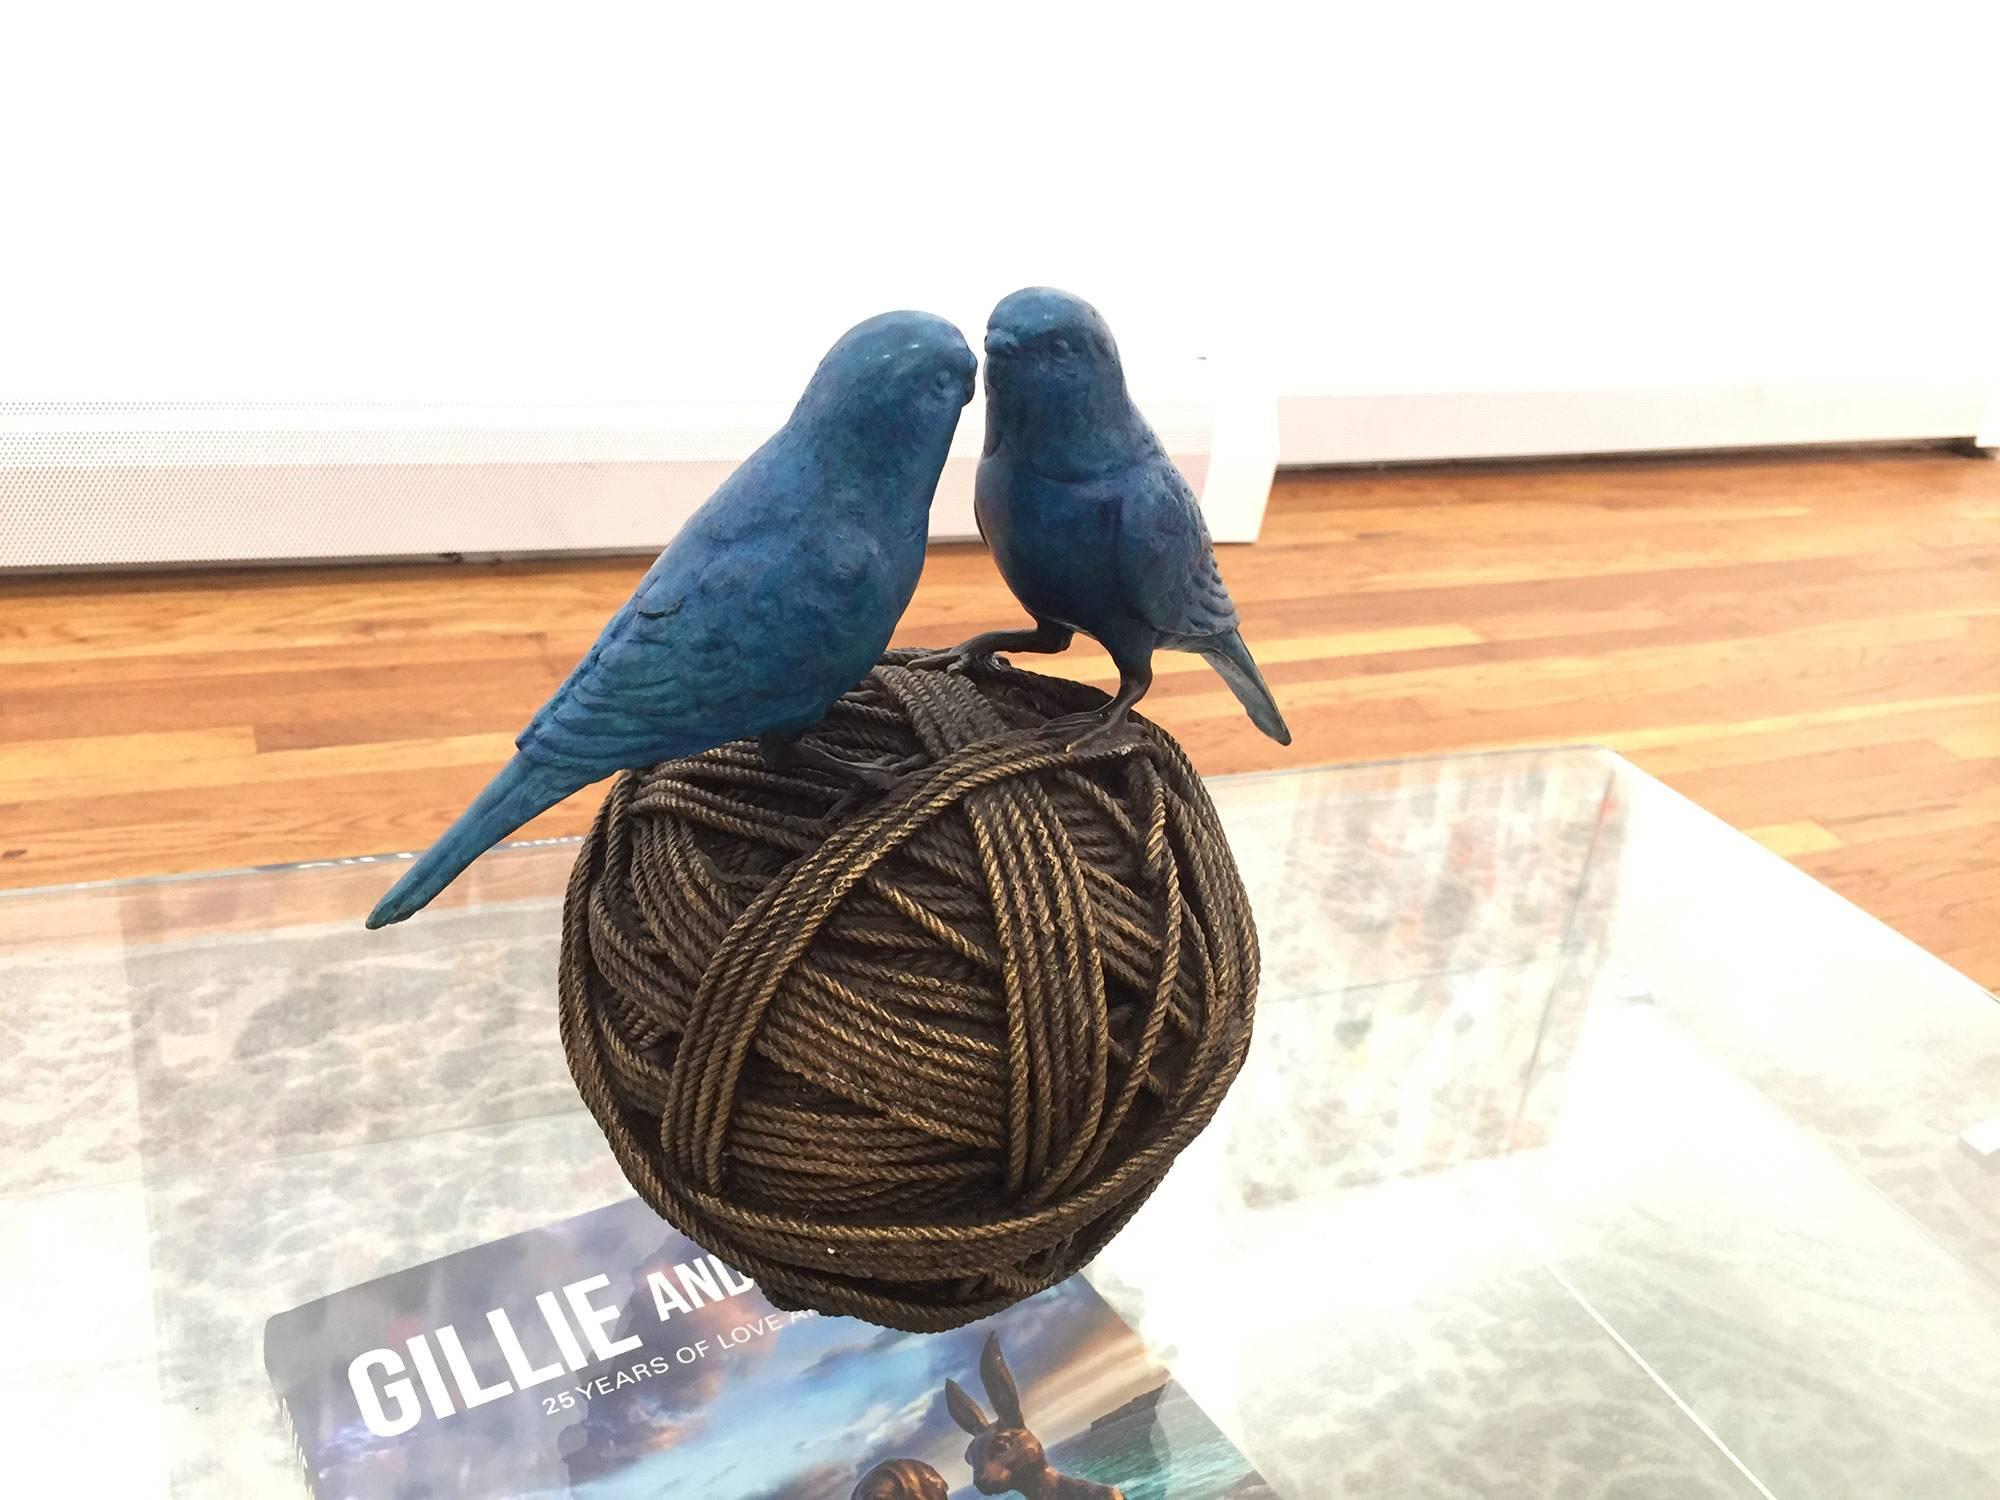 Life's a Ball (2 Budgies on ball) - Sculpture by Gillie and Marc Schattner